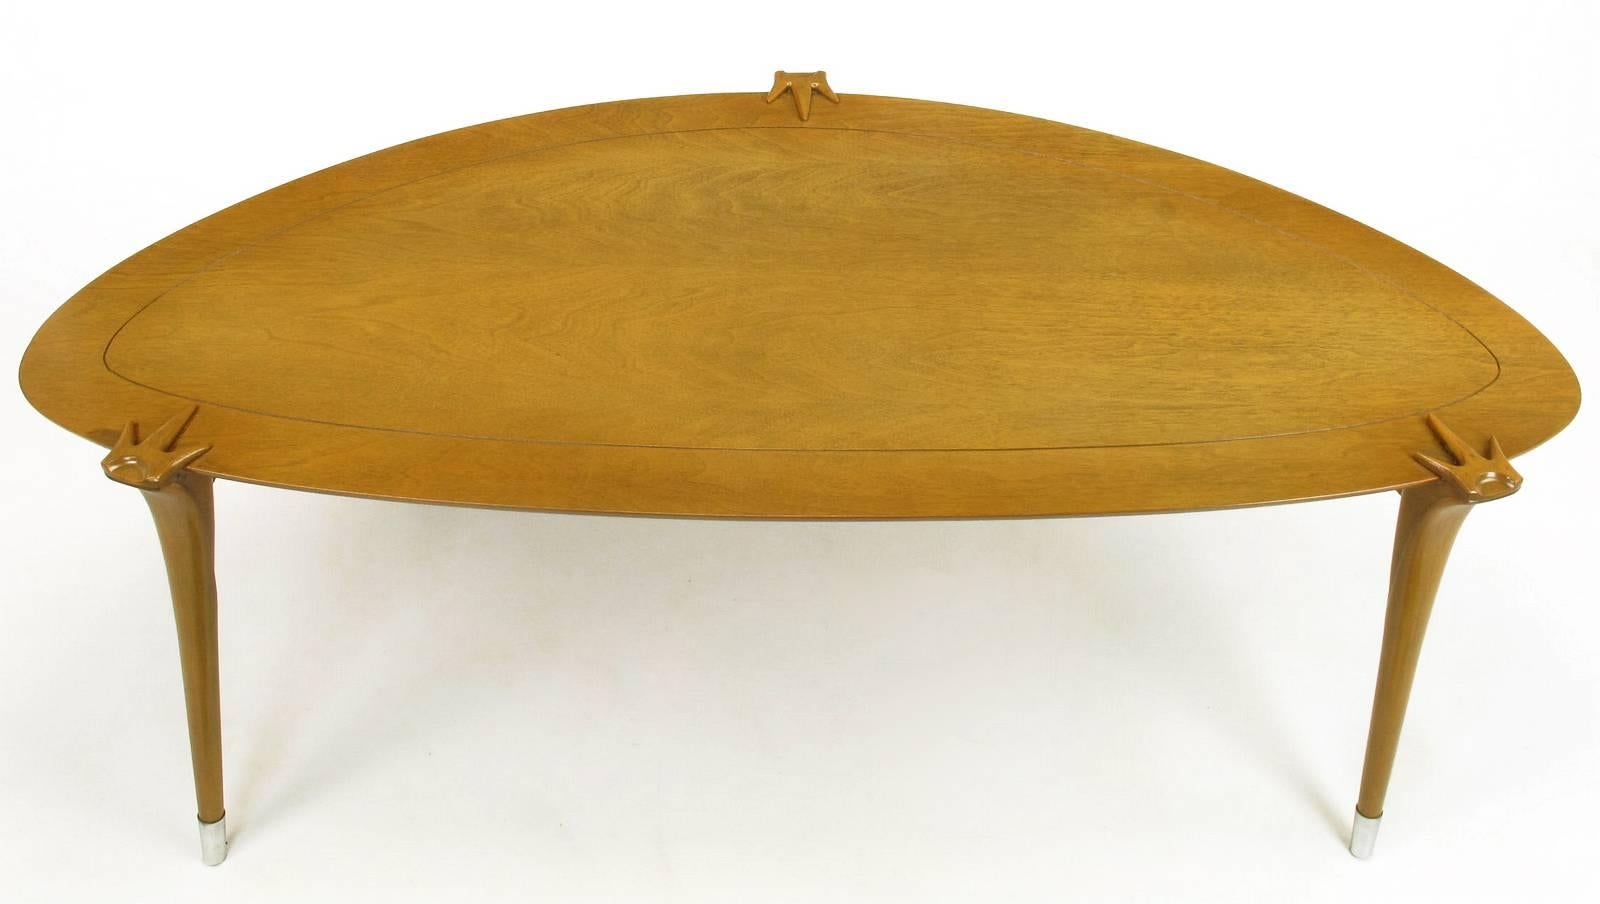 Bleached 1950s Walnut Triangular Coffee Table with Talon-Clasp Legs and Aluminum Sabots